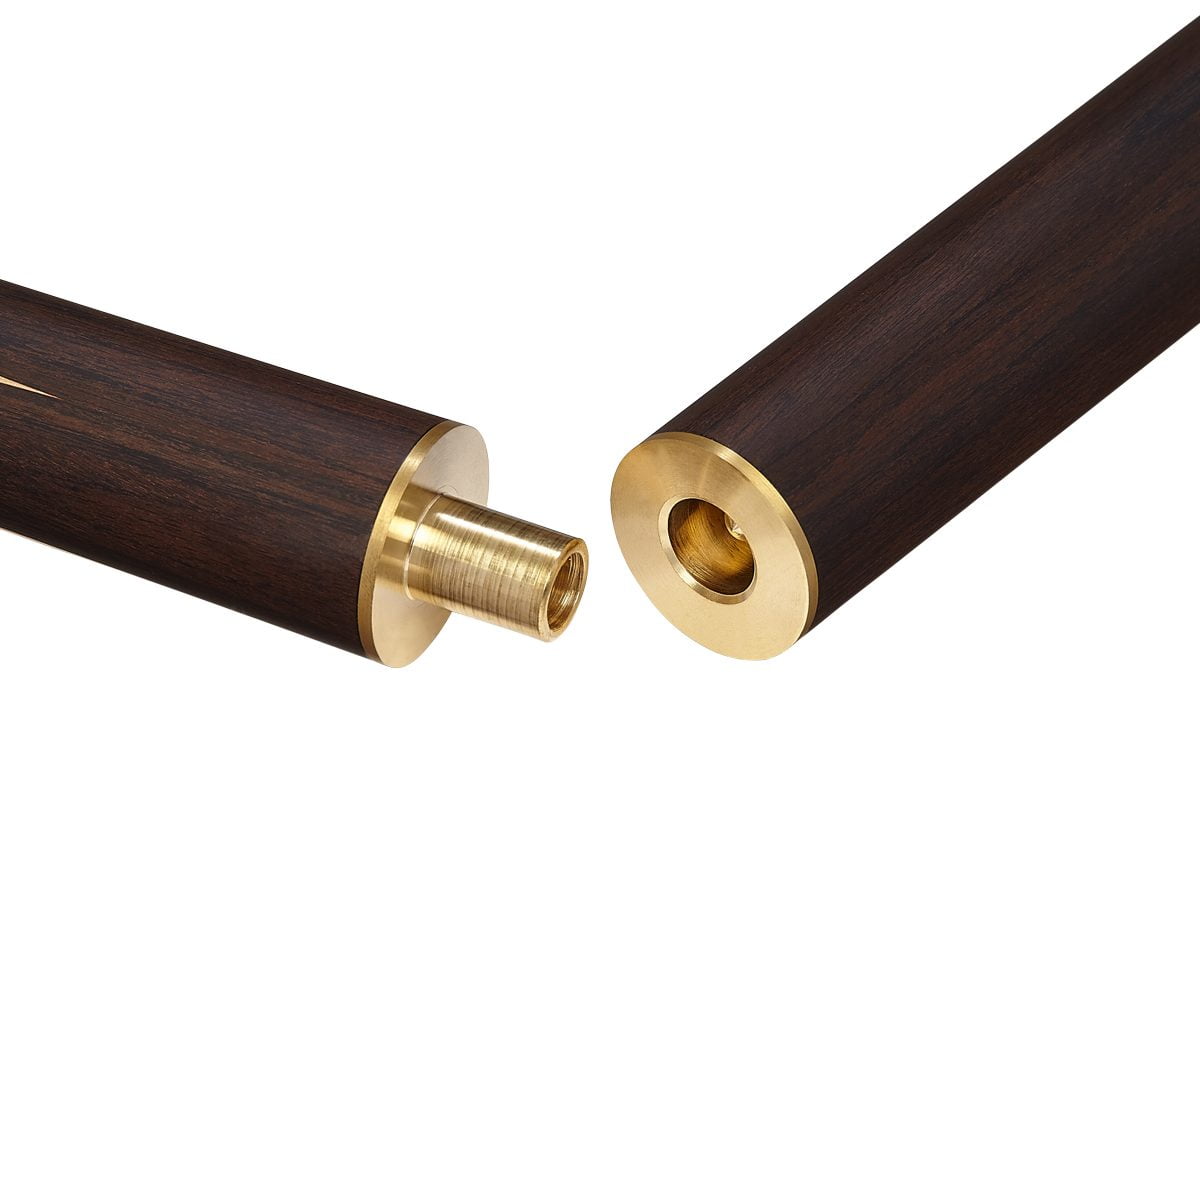 Powerglide Endeavour ¾ Jointed Snooker Cue